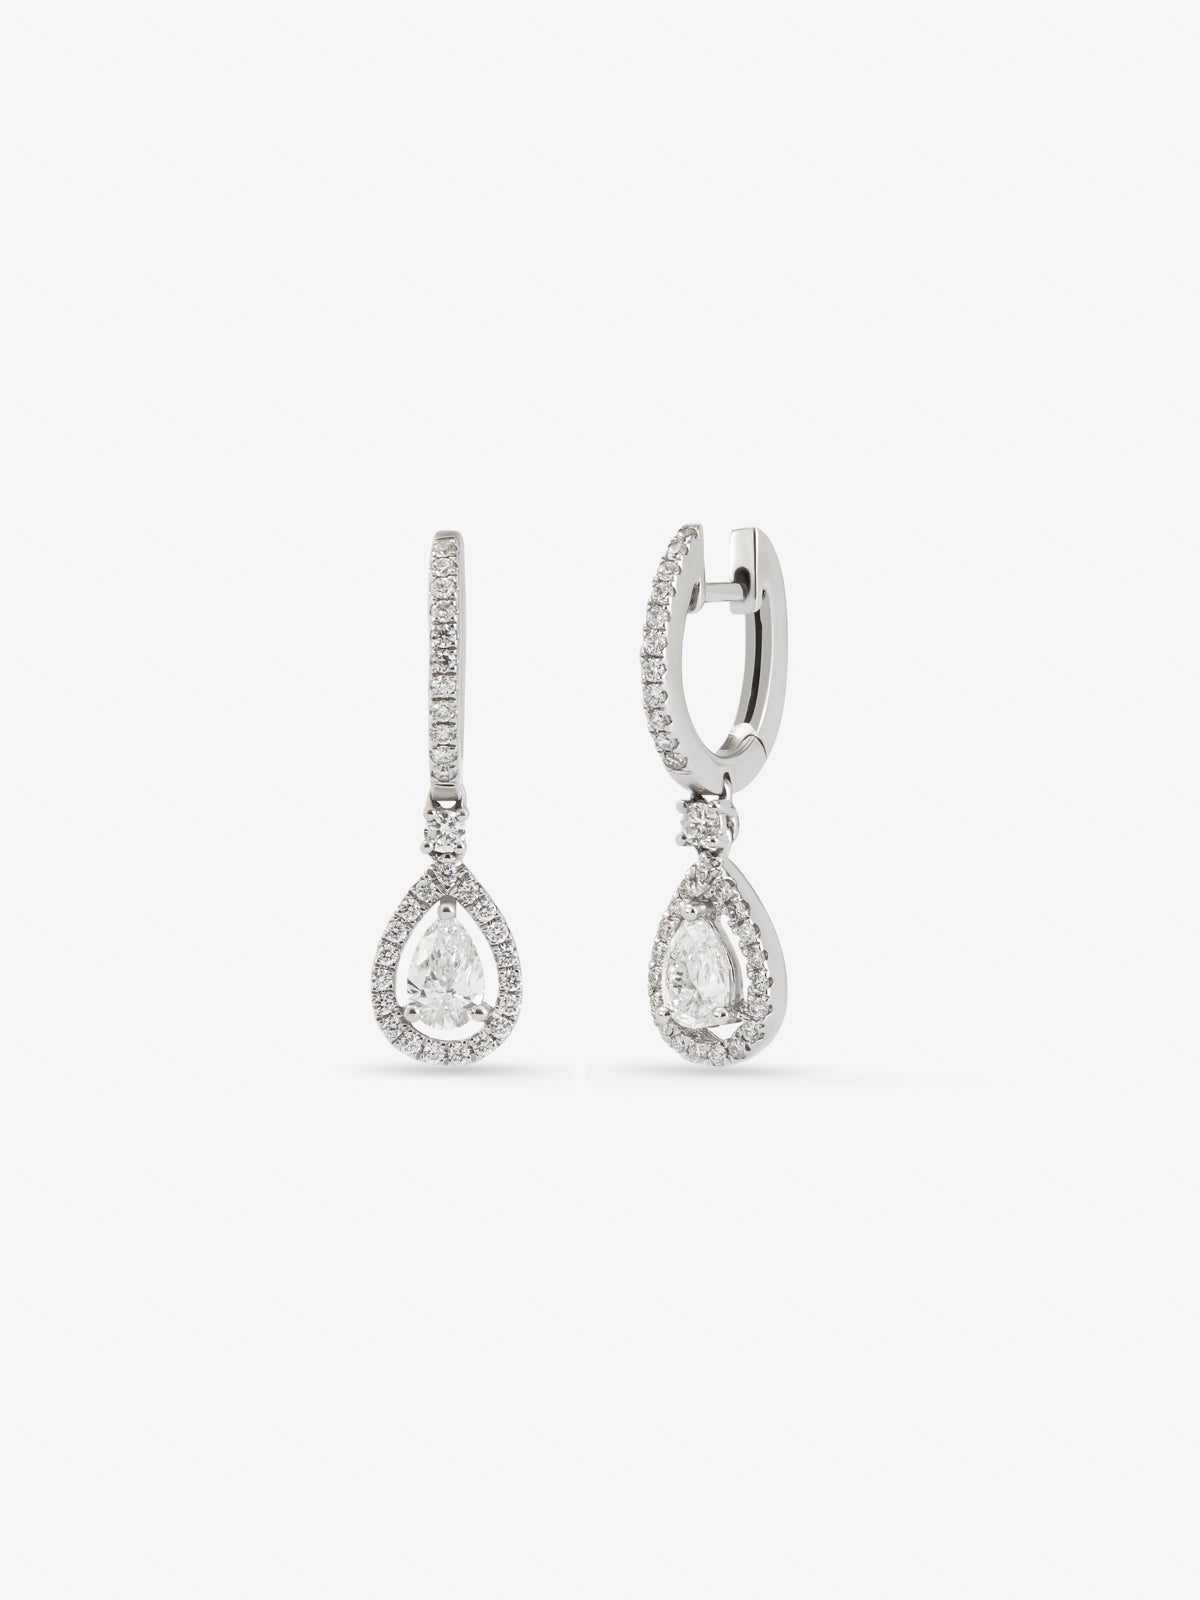 18K white gold earrings with 1.02 ct pear-cut and brilliant-cut diamonds